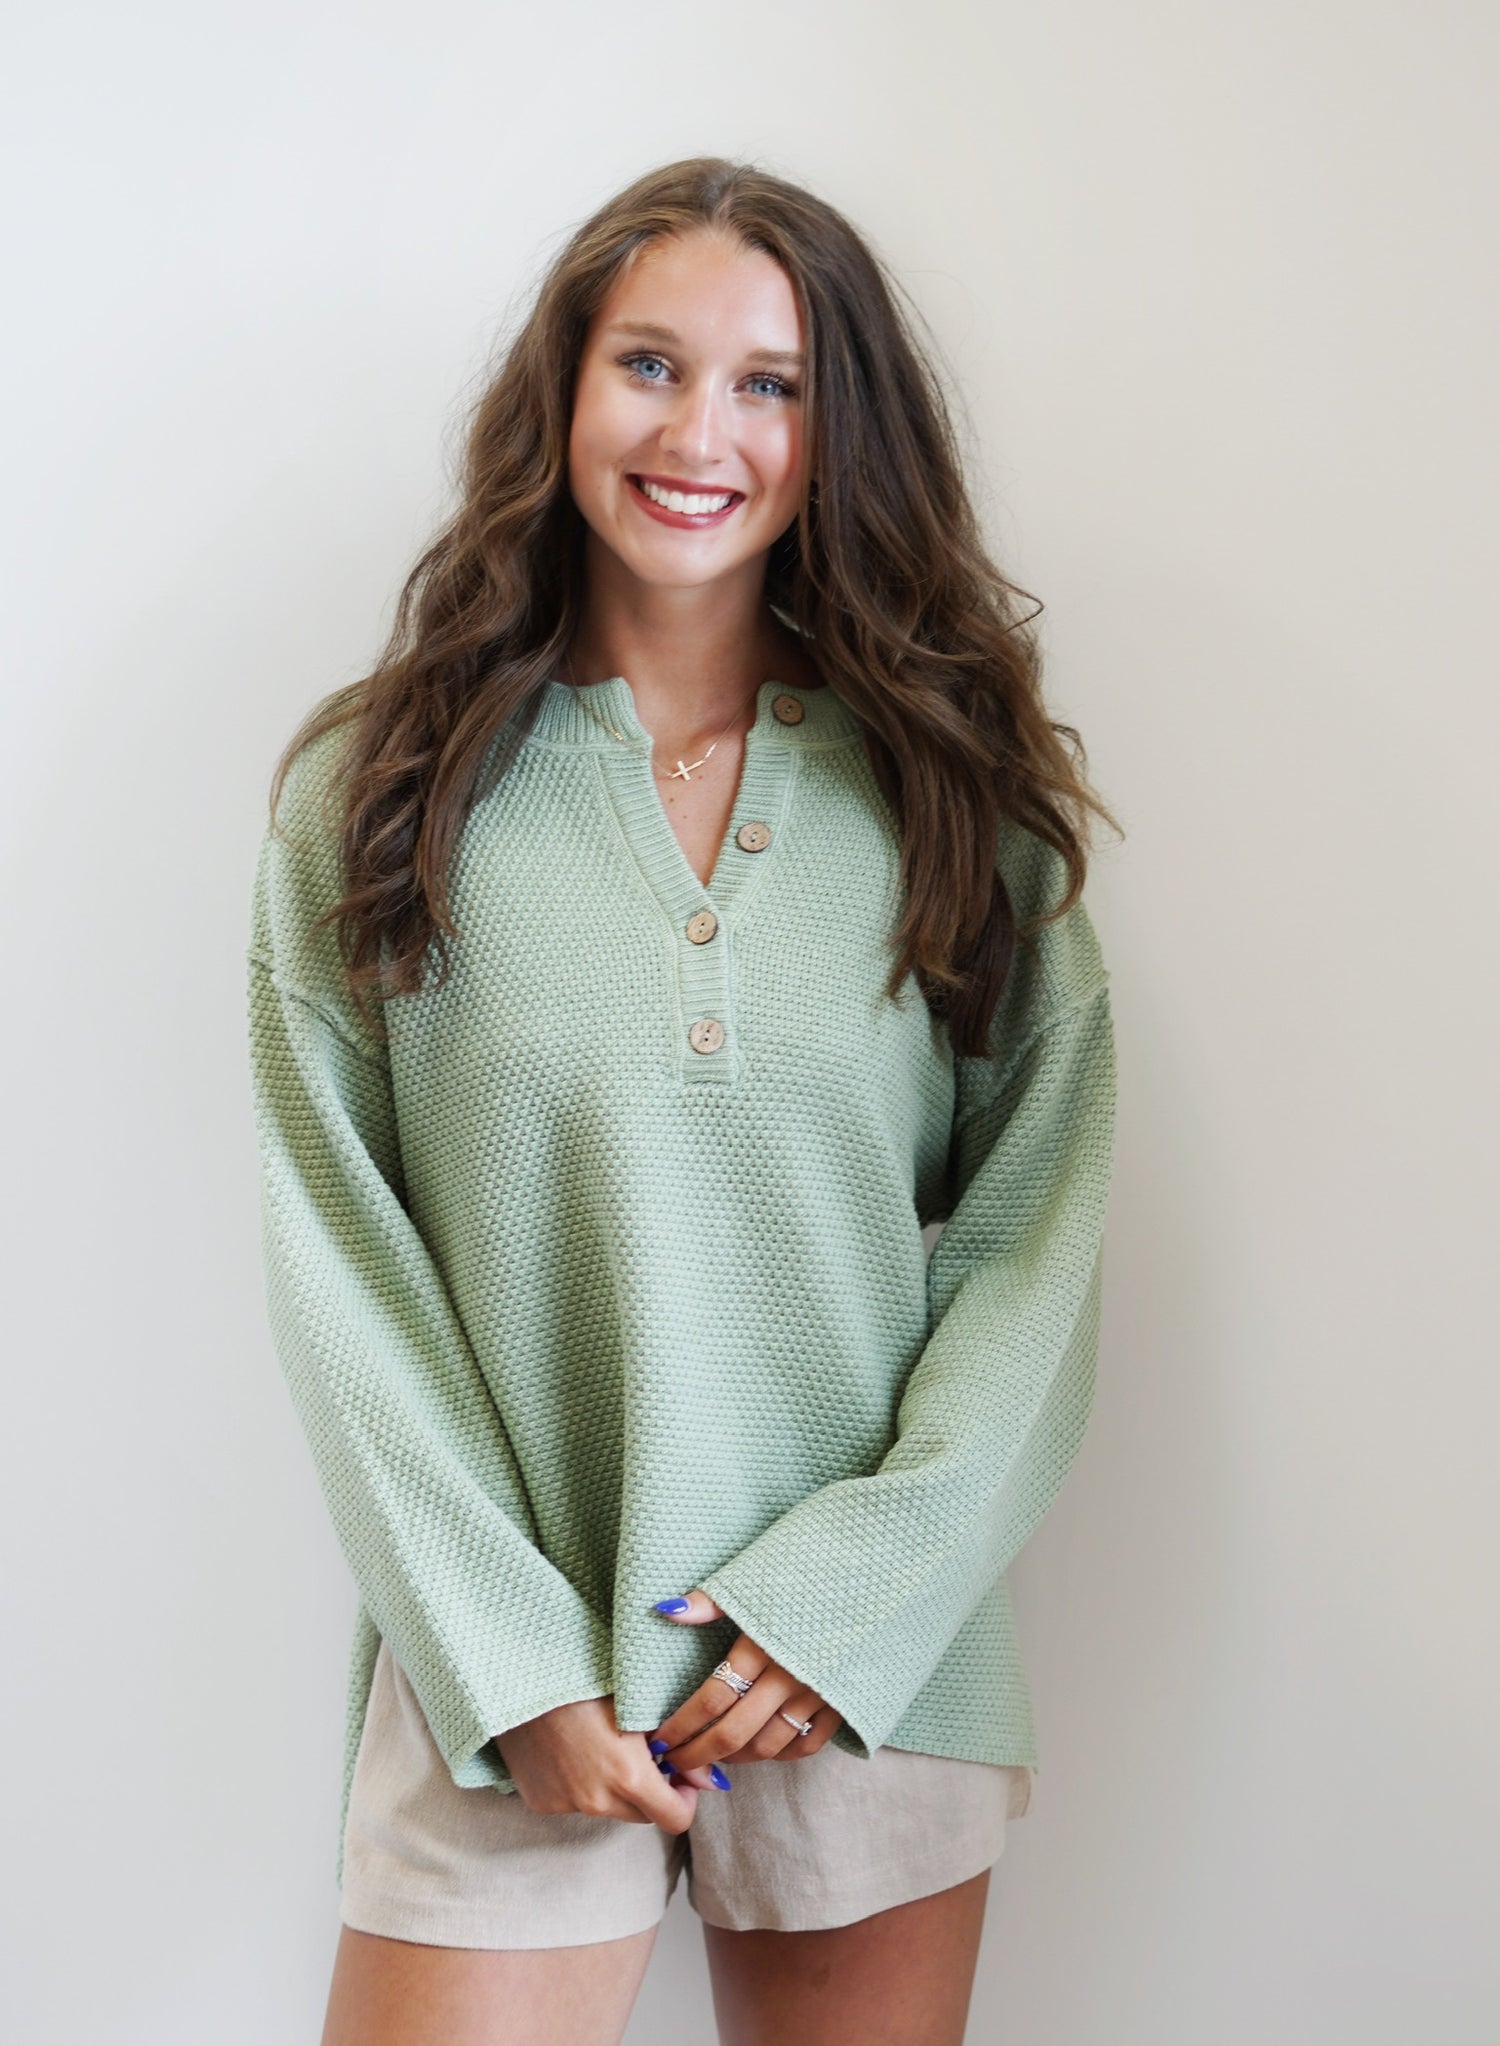 Honey Oversized Henley Sweater Top Henley Neckline w/ Functional Buttons Long Sleeve High Low Hem w/ Side Slits Sage Color Relaxed Fit 55% Acrylic, 45% Cotton